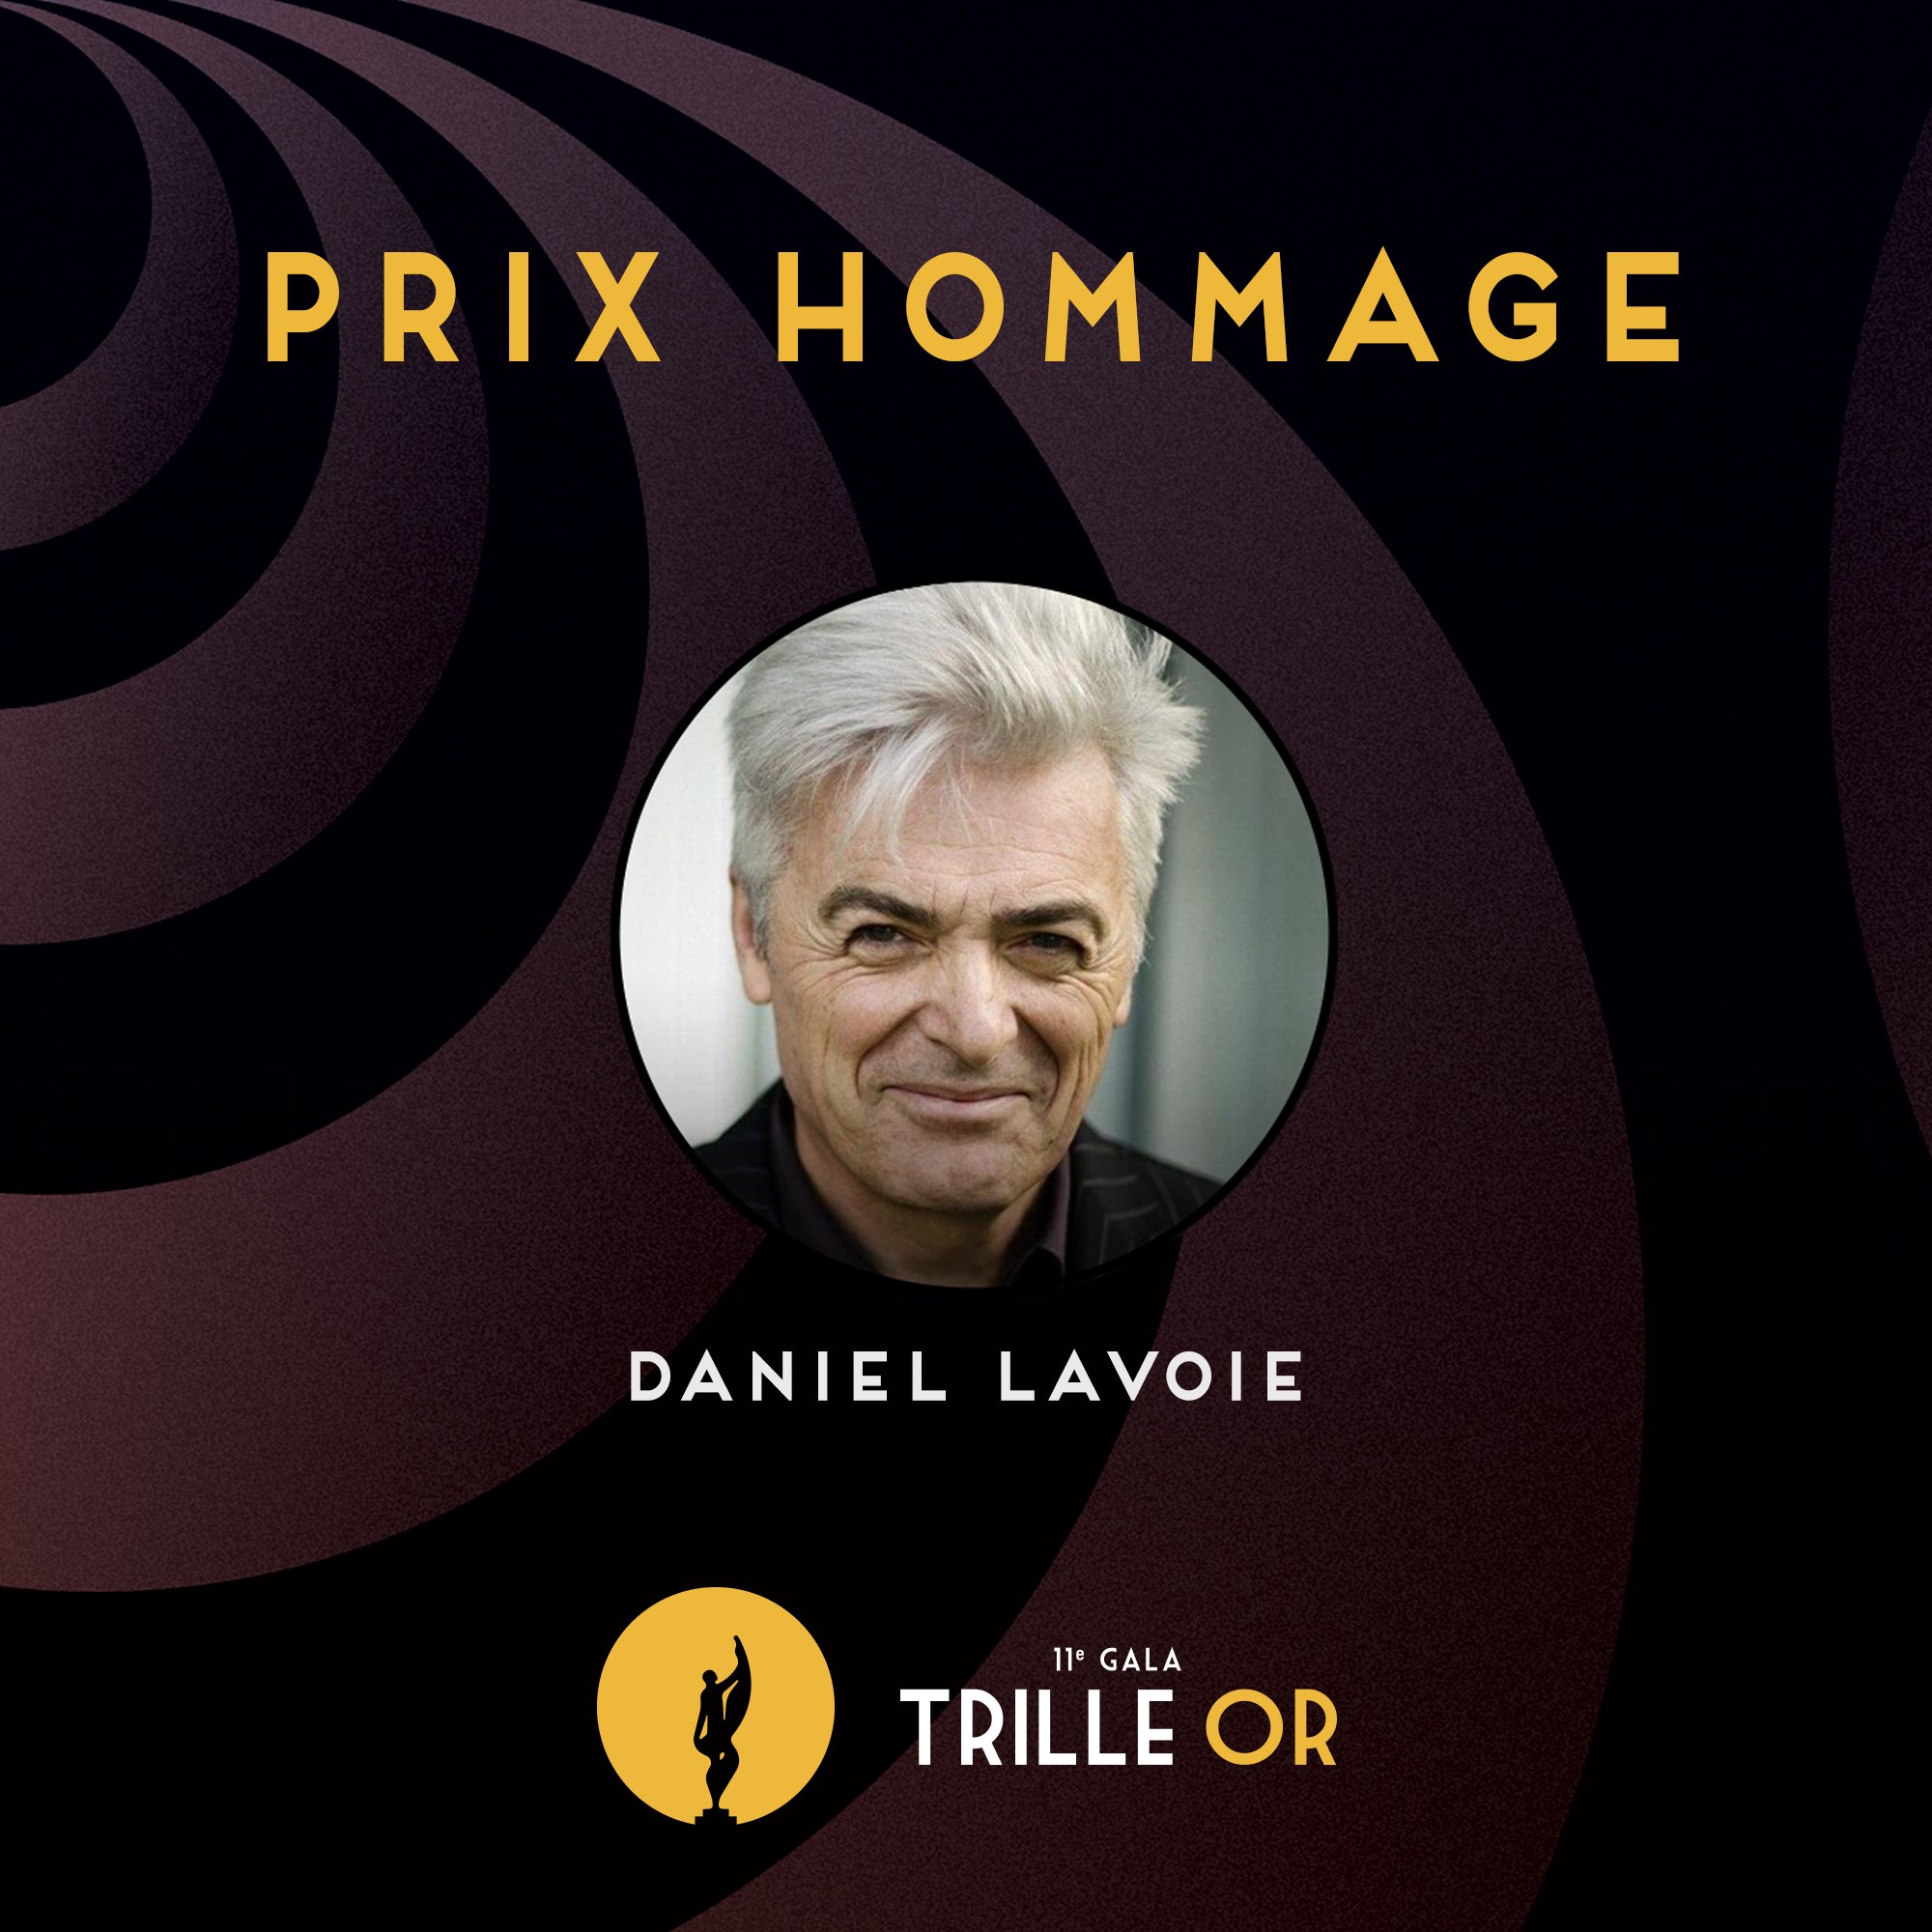 Prix Hommage Trille Or